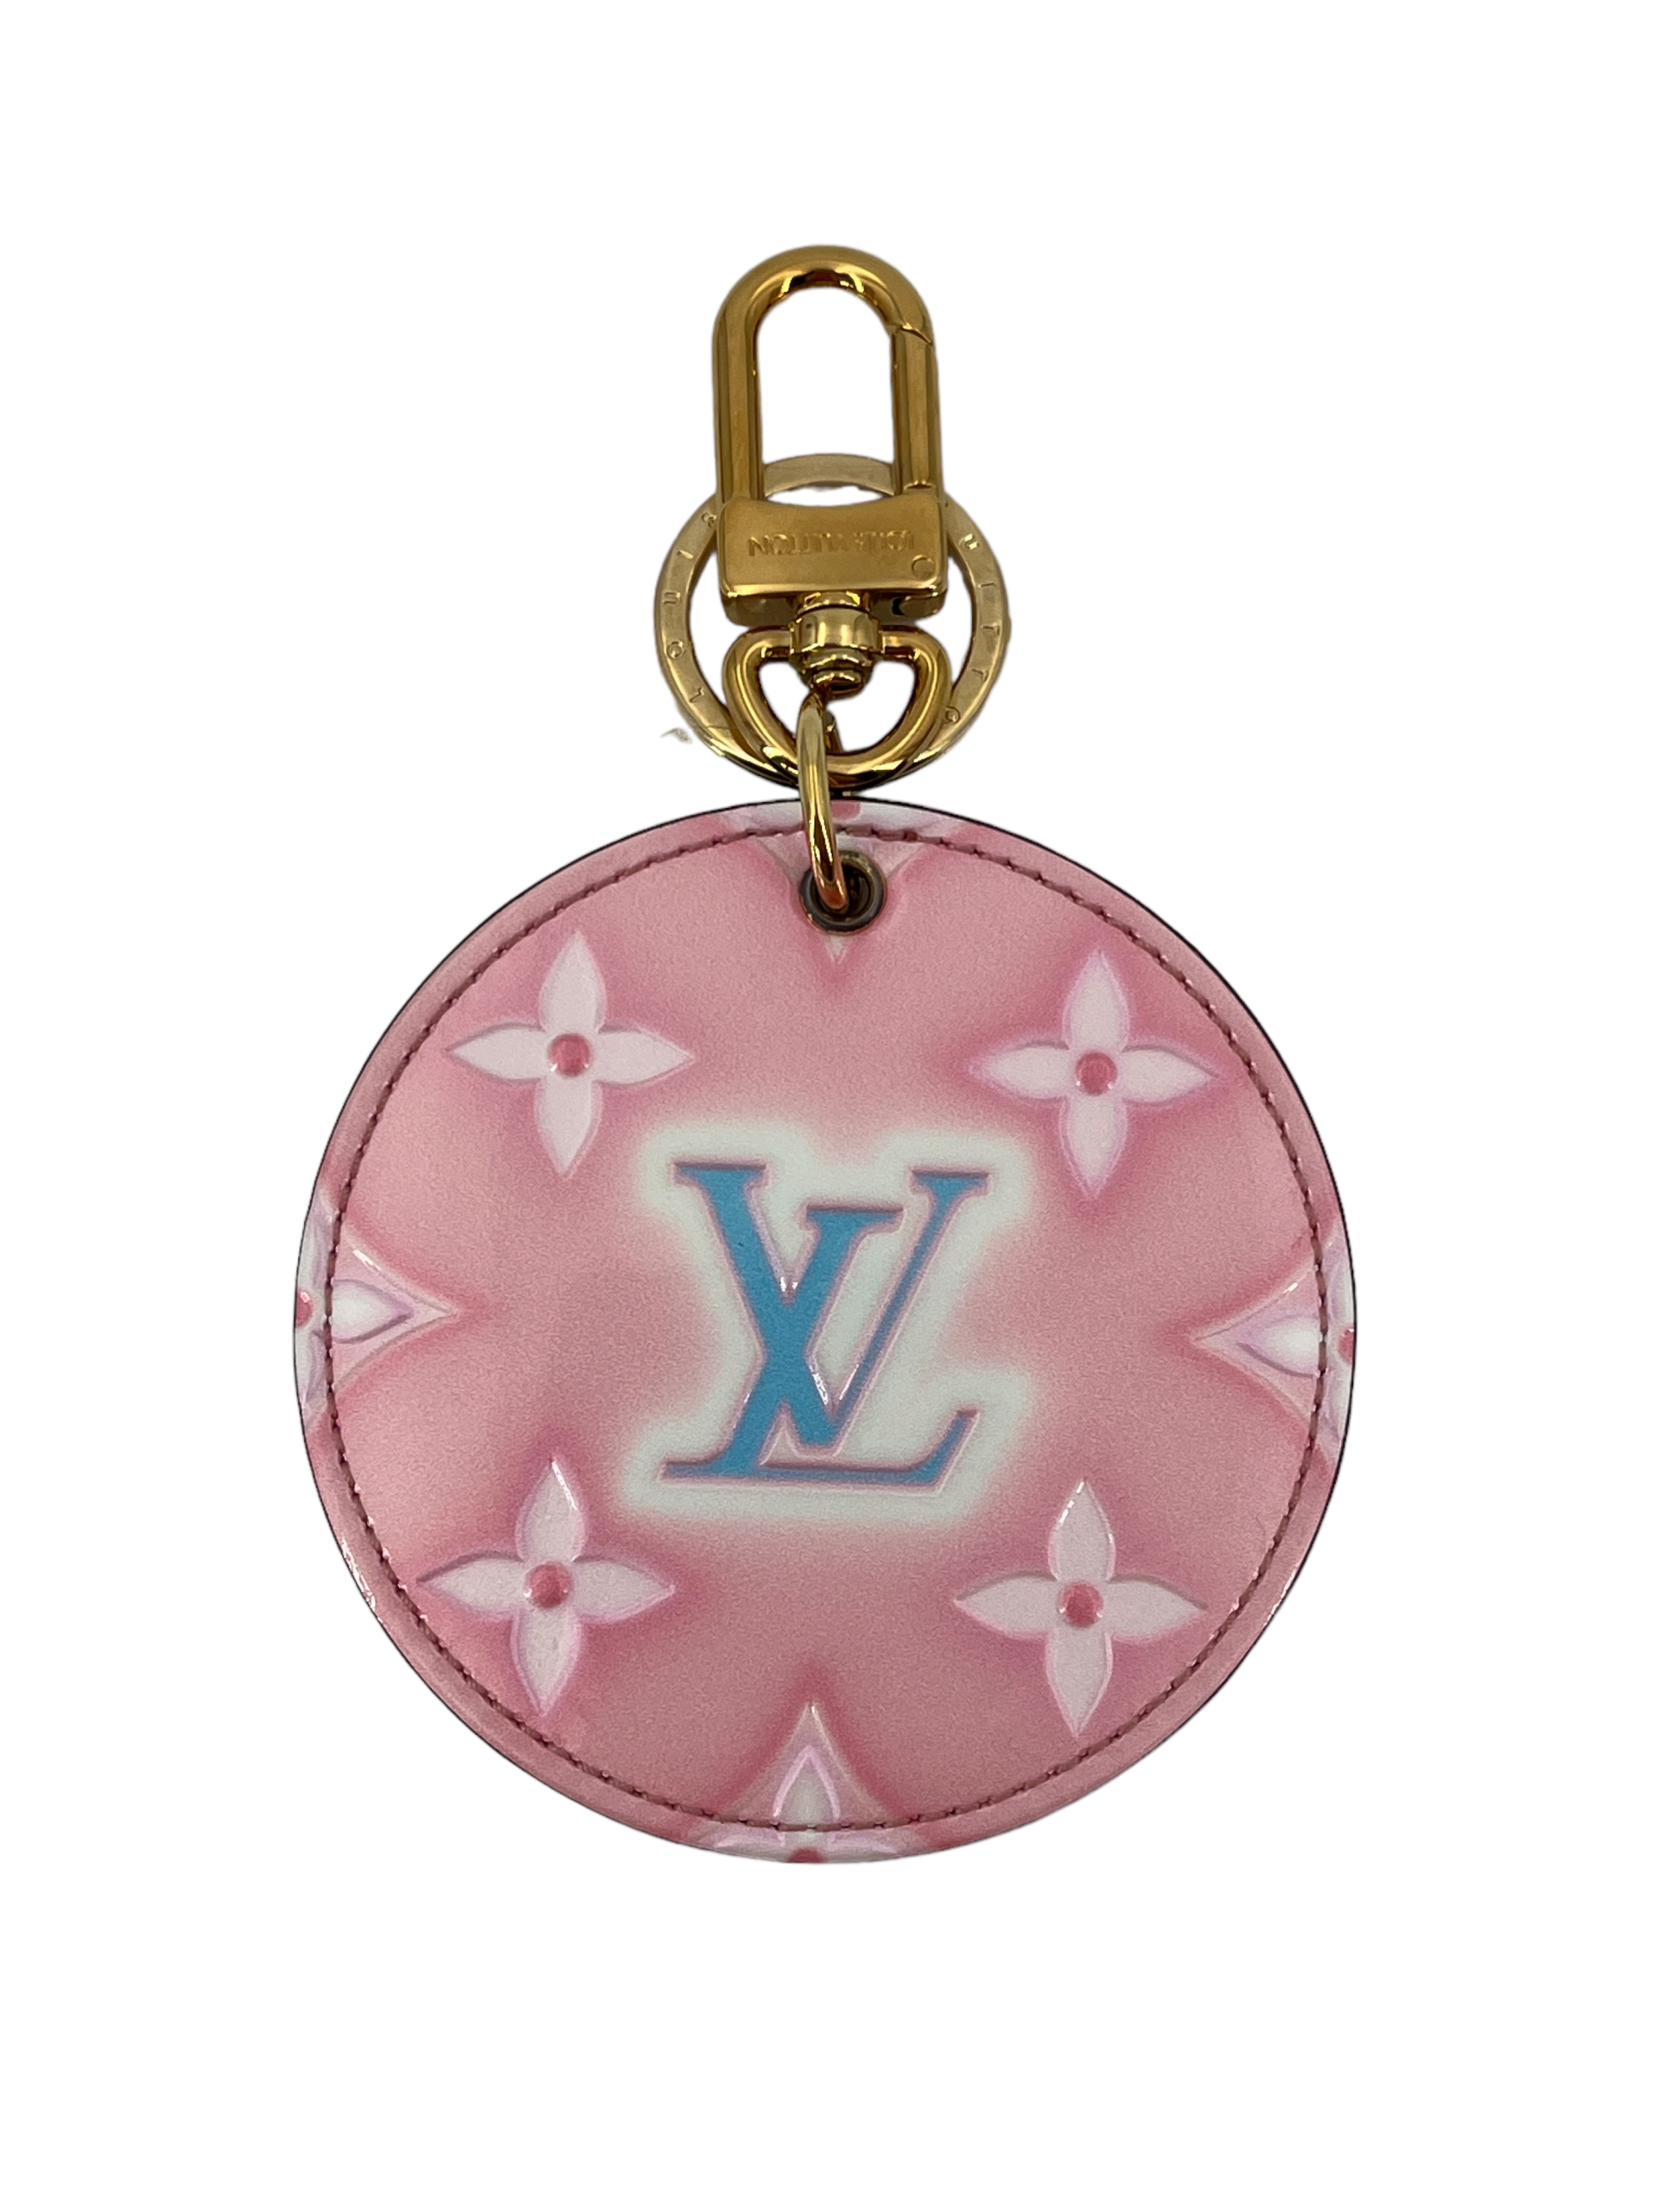 Louis Vuitton Valentine's Day Bag Charm and Key Holder